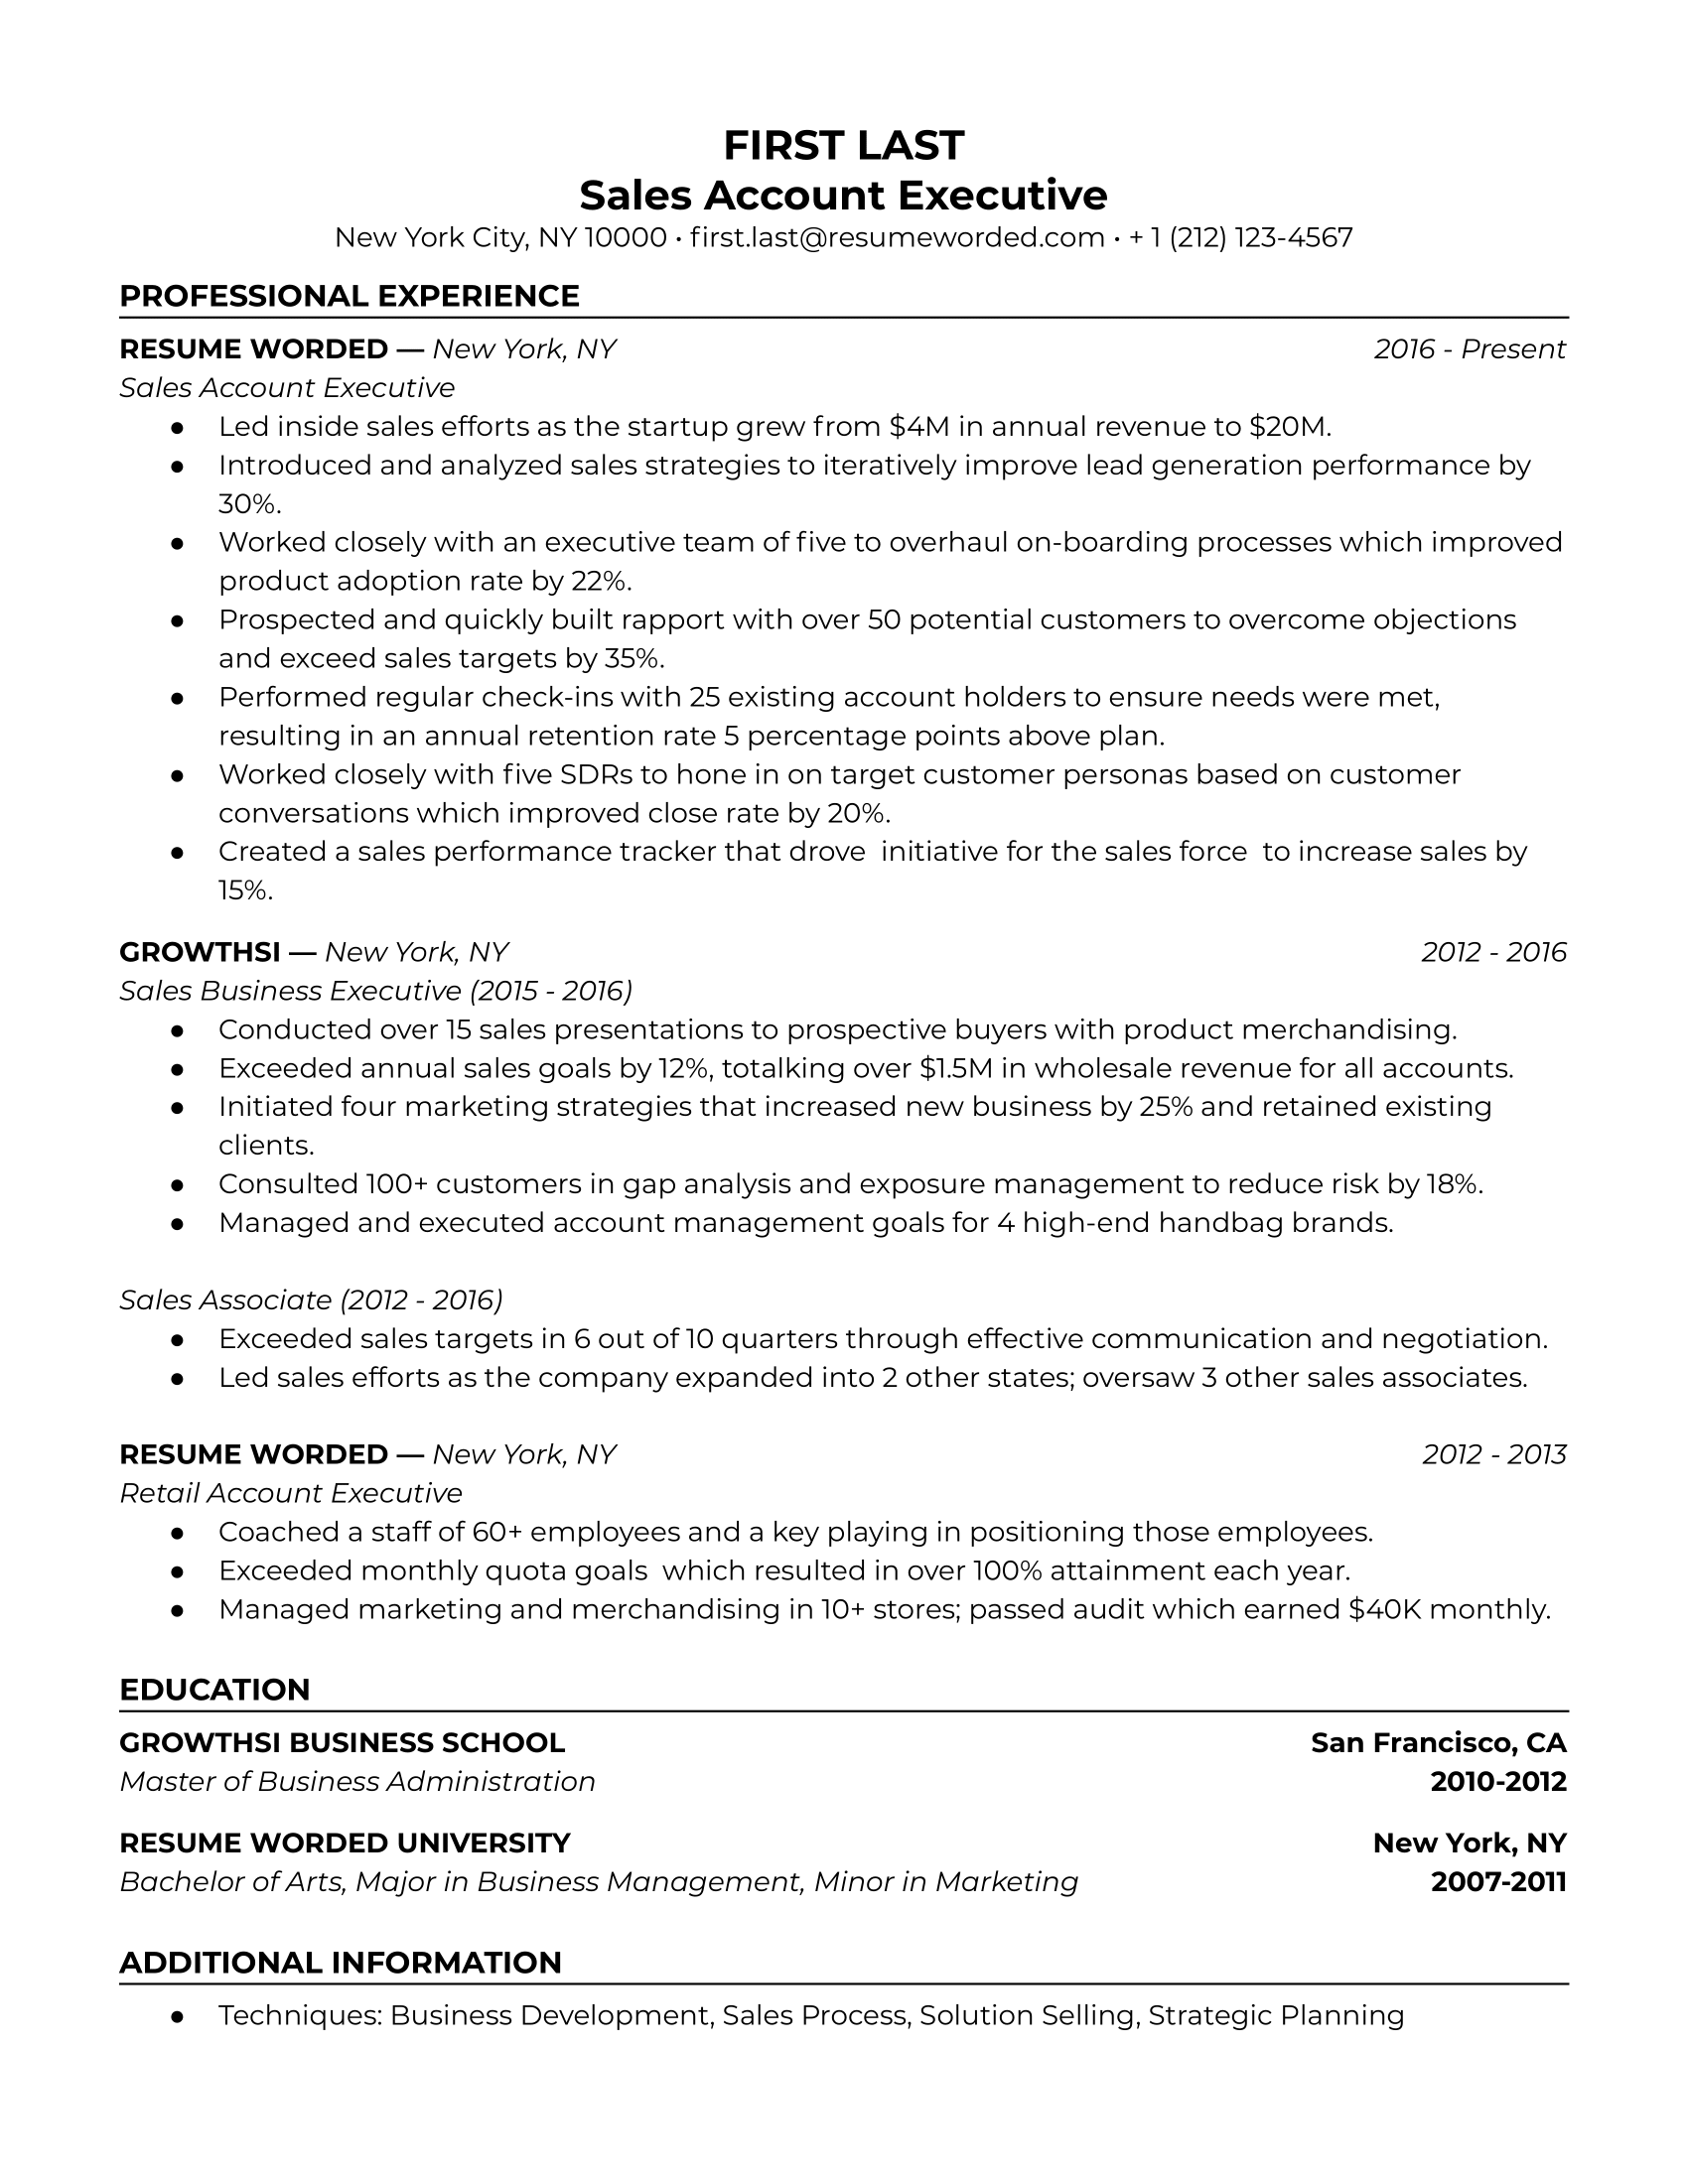 Sales Account Executive Resume Template + Example